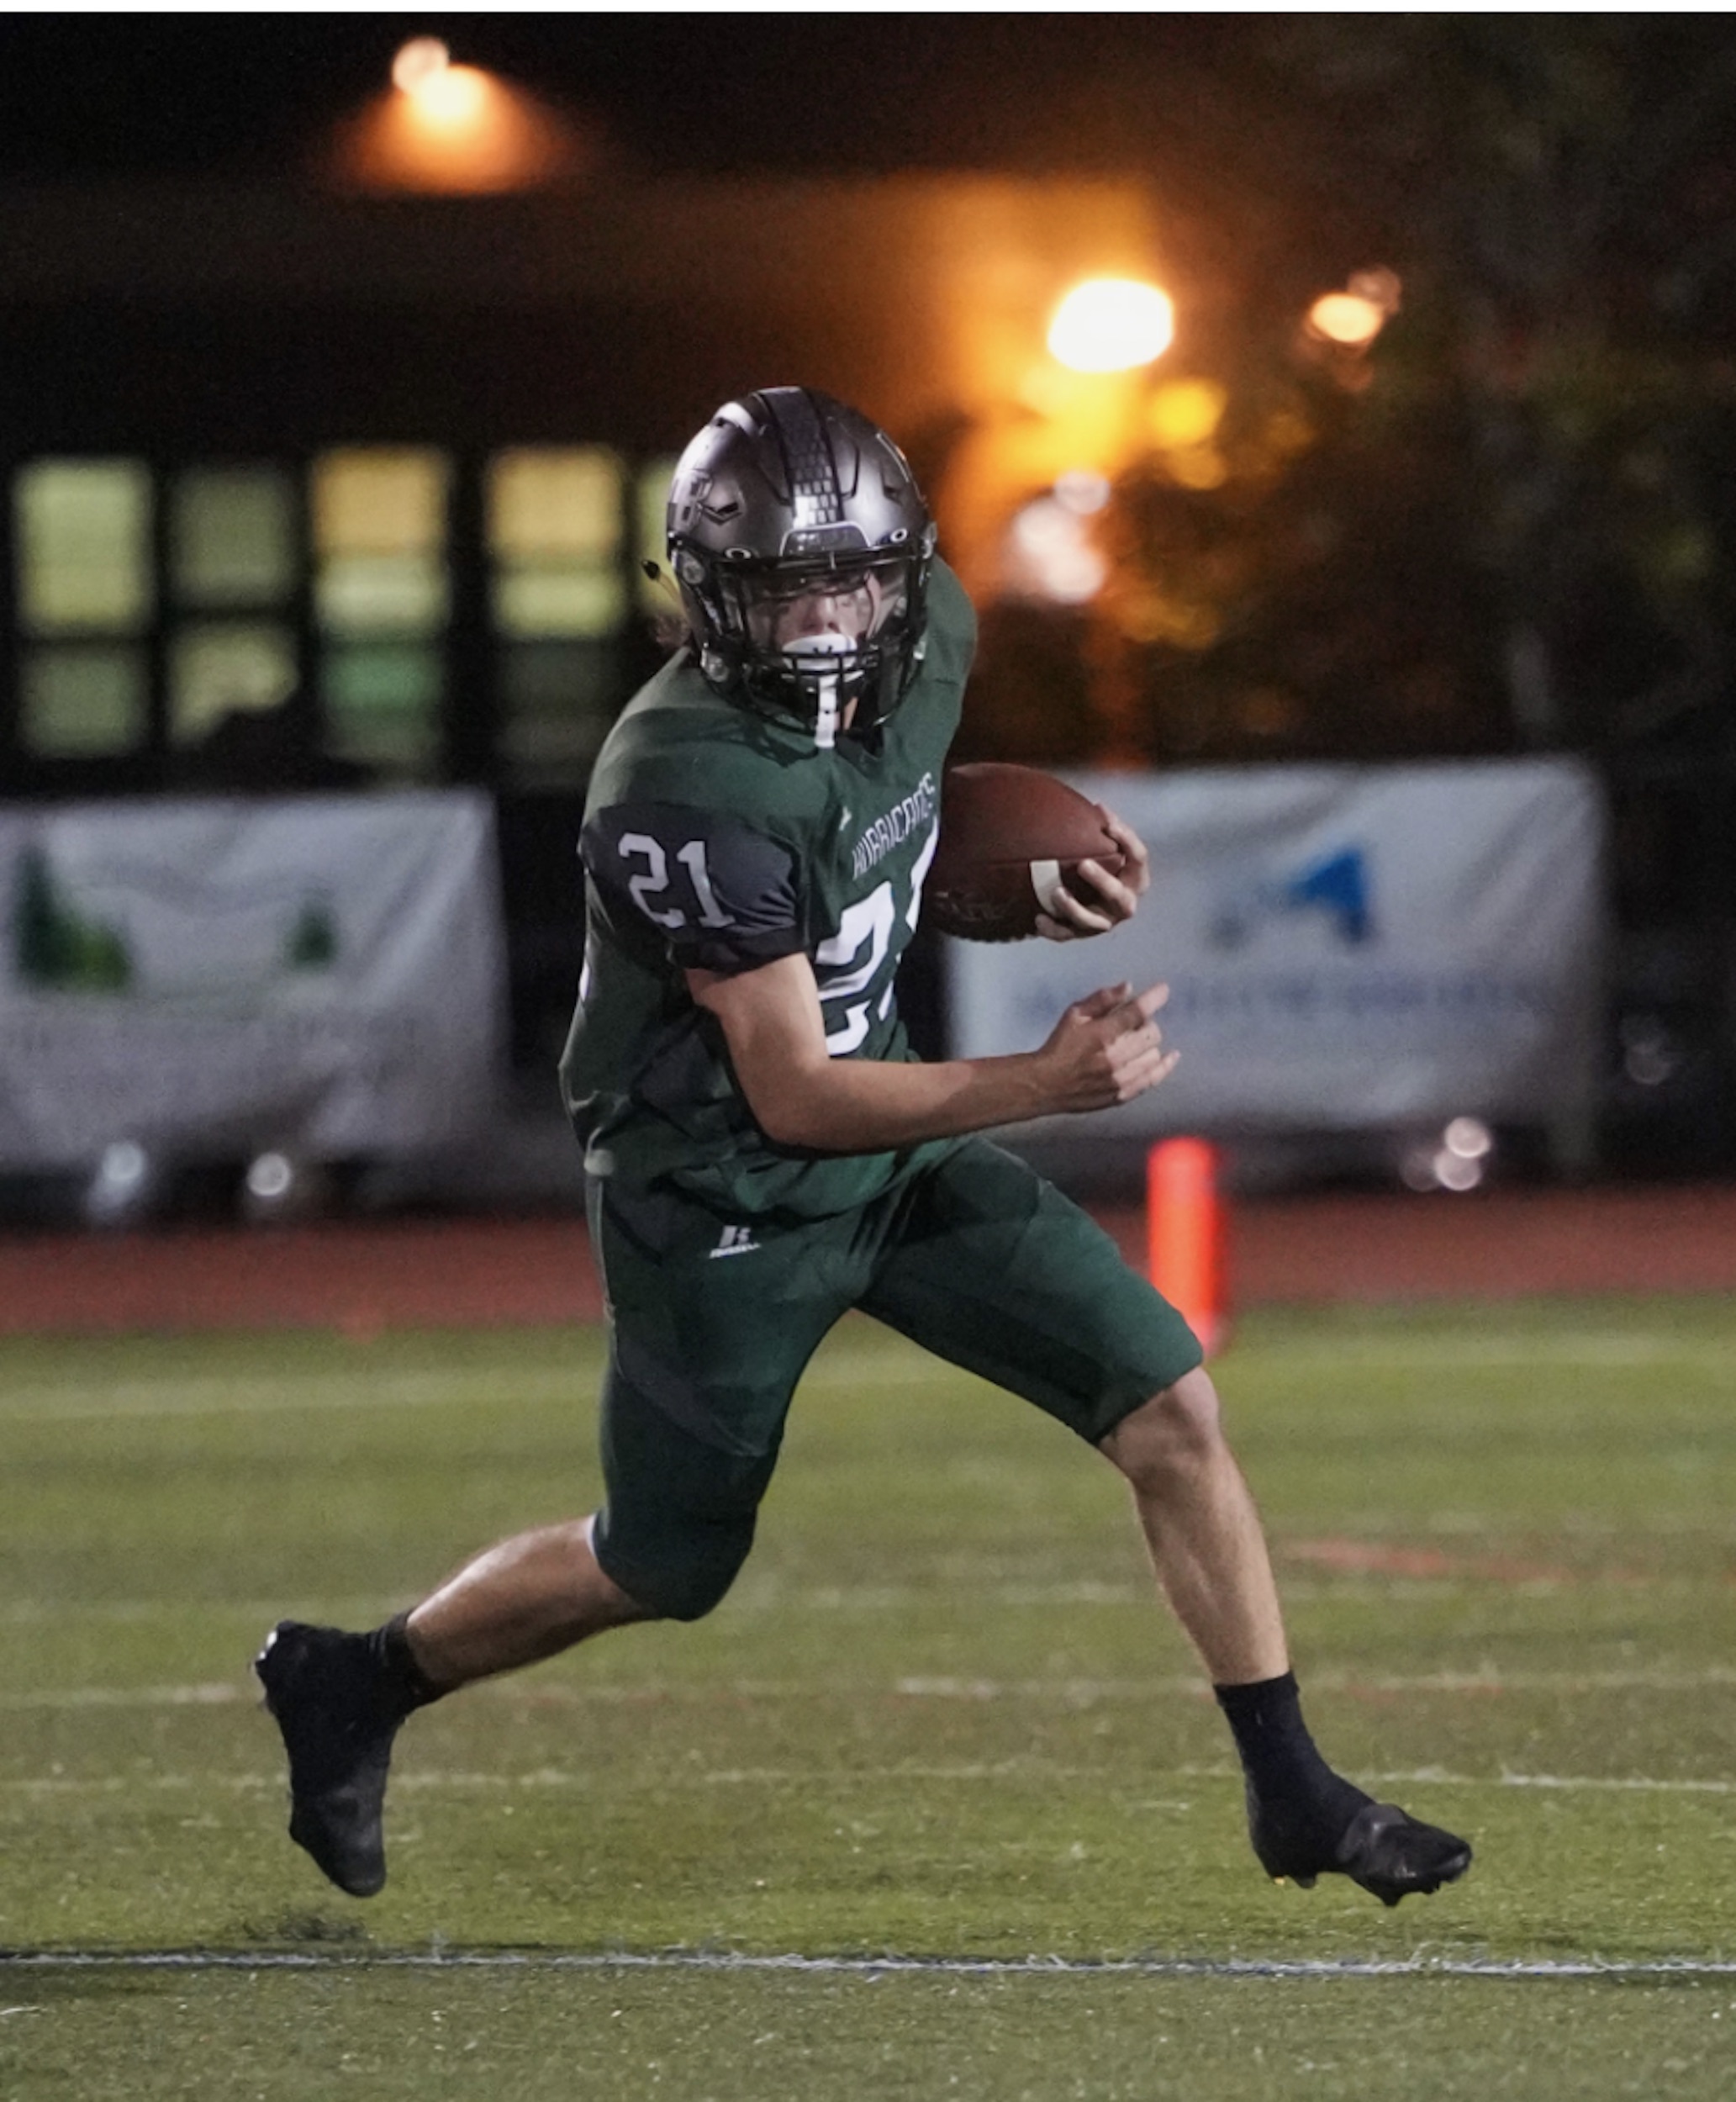 Westhampton Beach junior running back Nolan Michalowski, above in a game last season, rushed for 95 yards and three 1-yard touchdowns on 12 carries. RON ESPOSITO